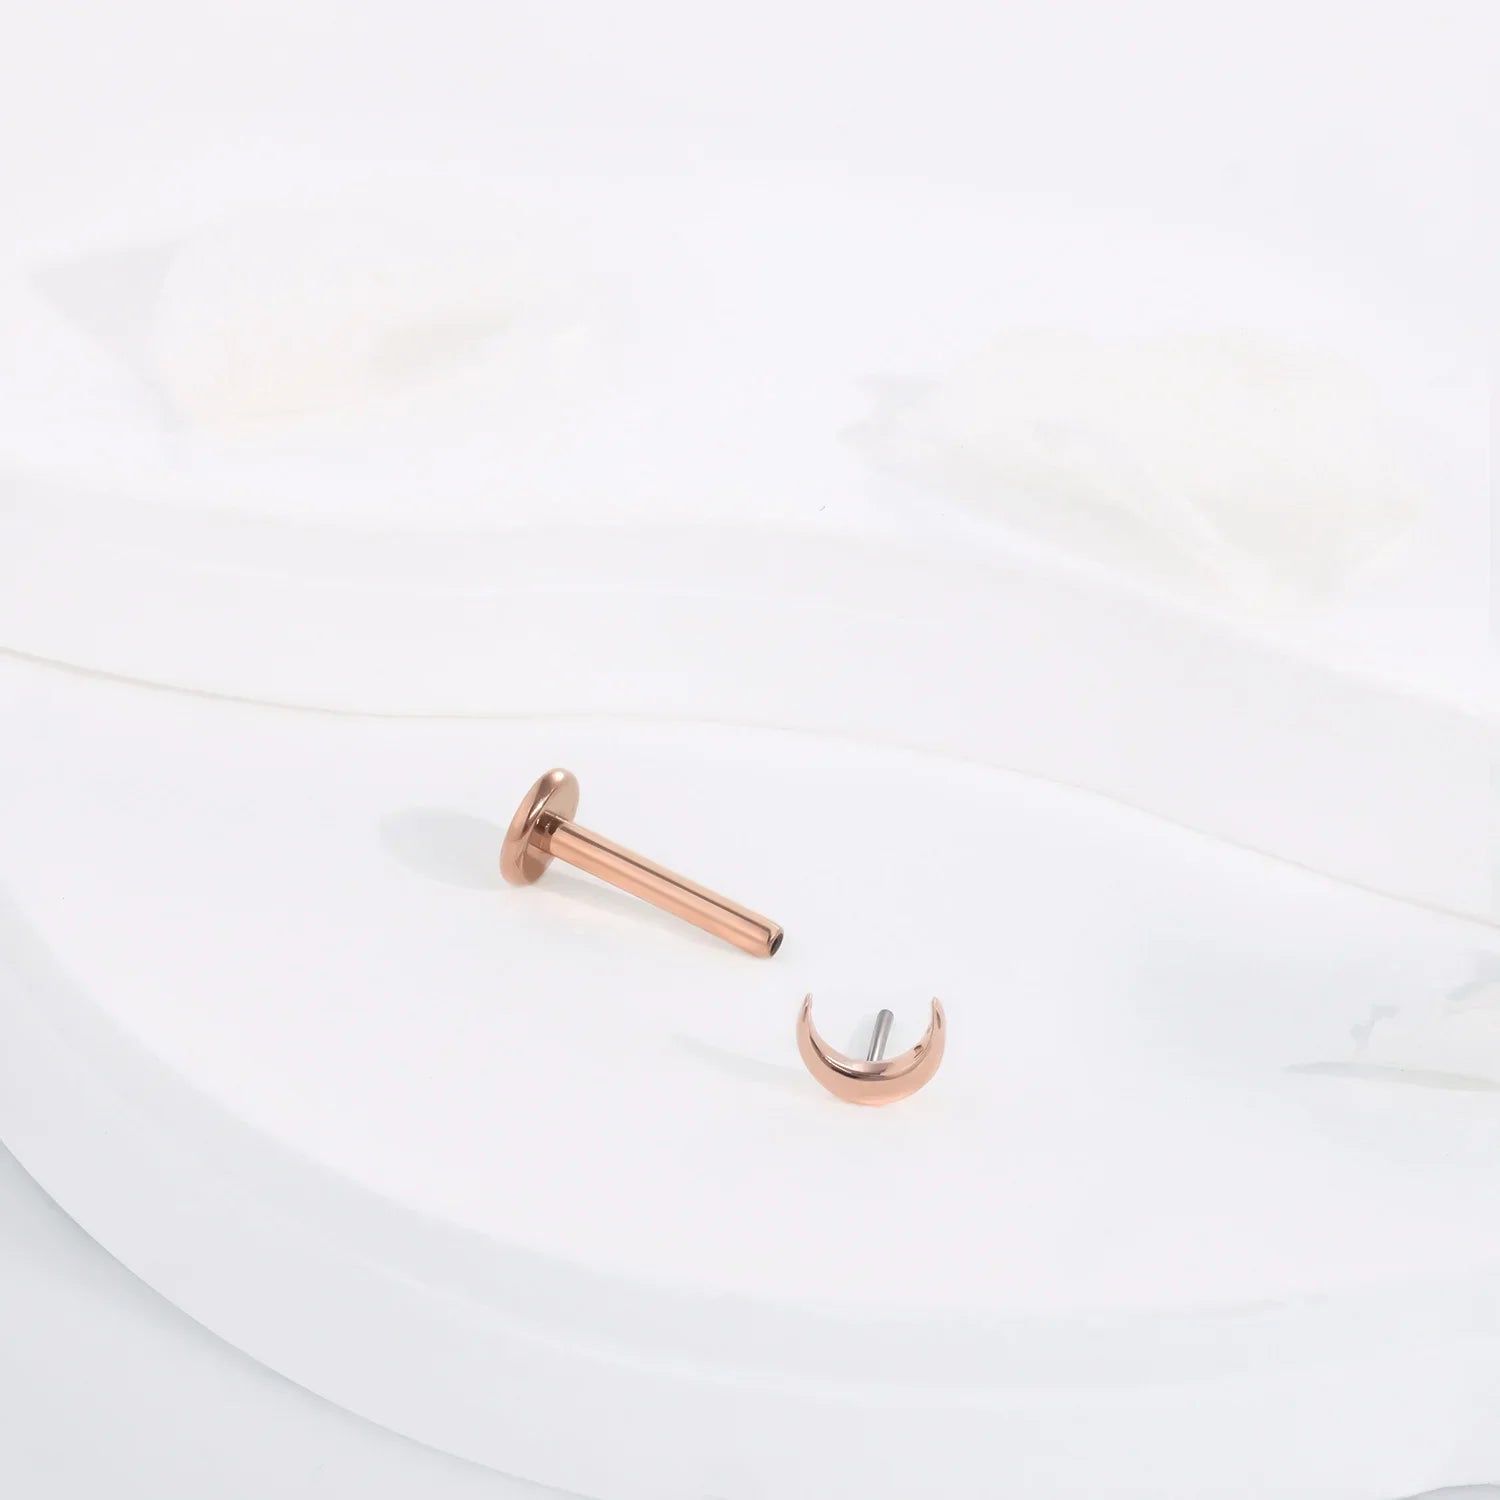 Rose gold nose stud with the moon 14K solid gold threadless ear stud lip stud Ashley Piercing Jewelry